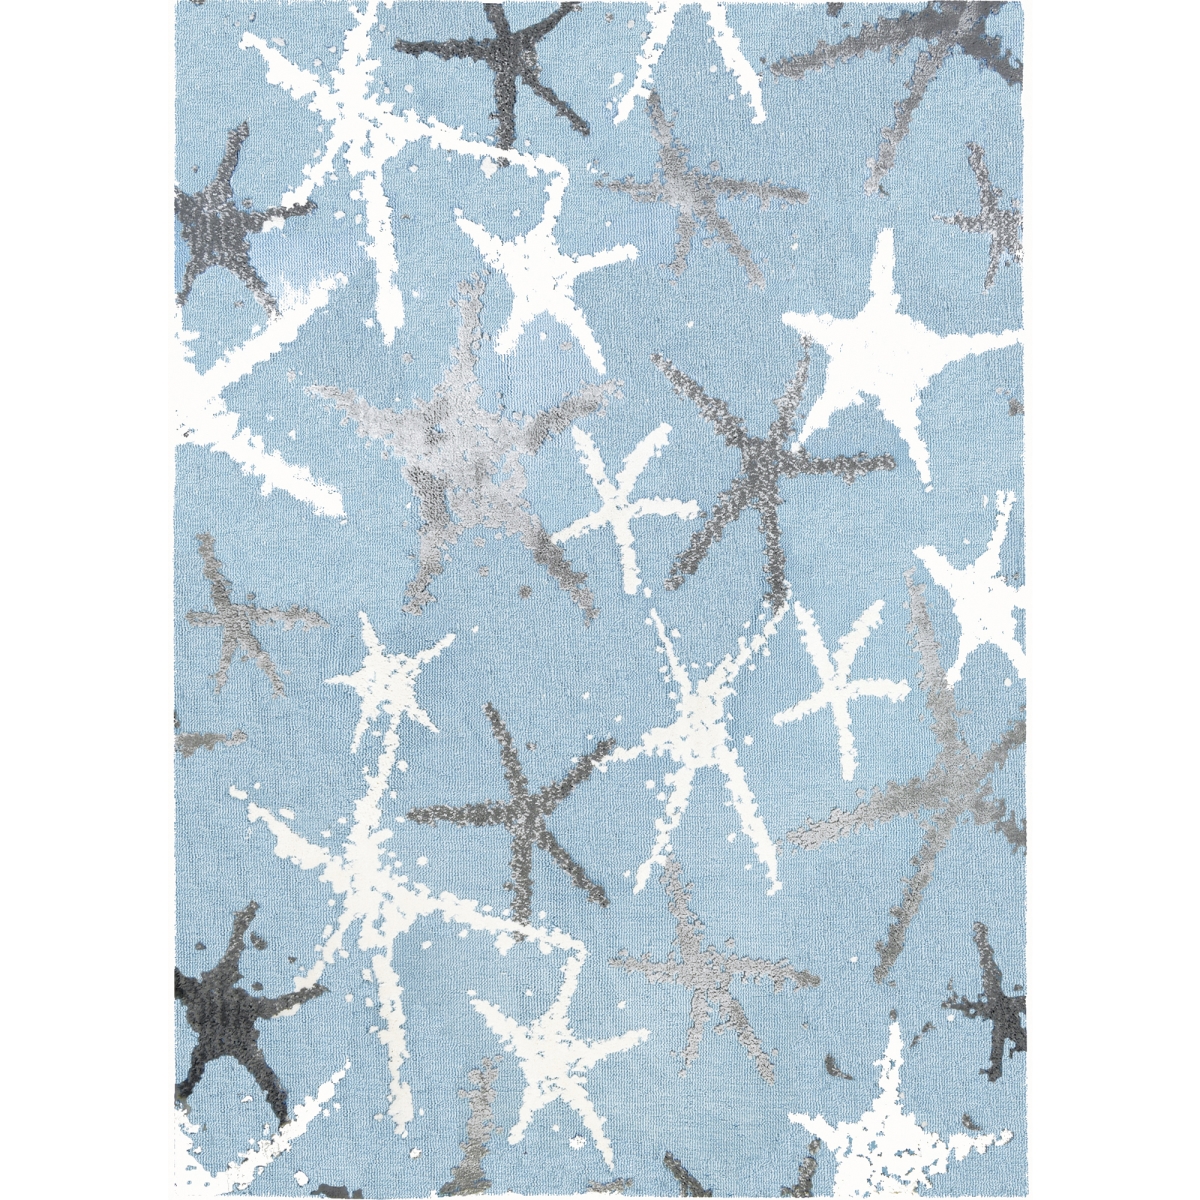 Pmf-kr001c 5 X 3 X 0.5 Ft. Tranquil Seas Indoor Area Rug, Multi Color